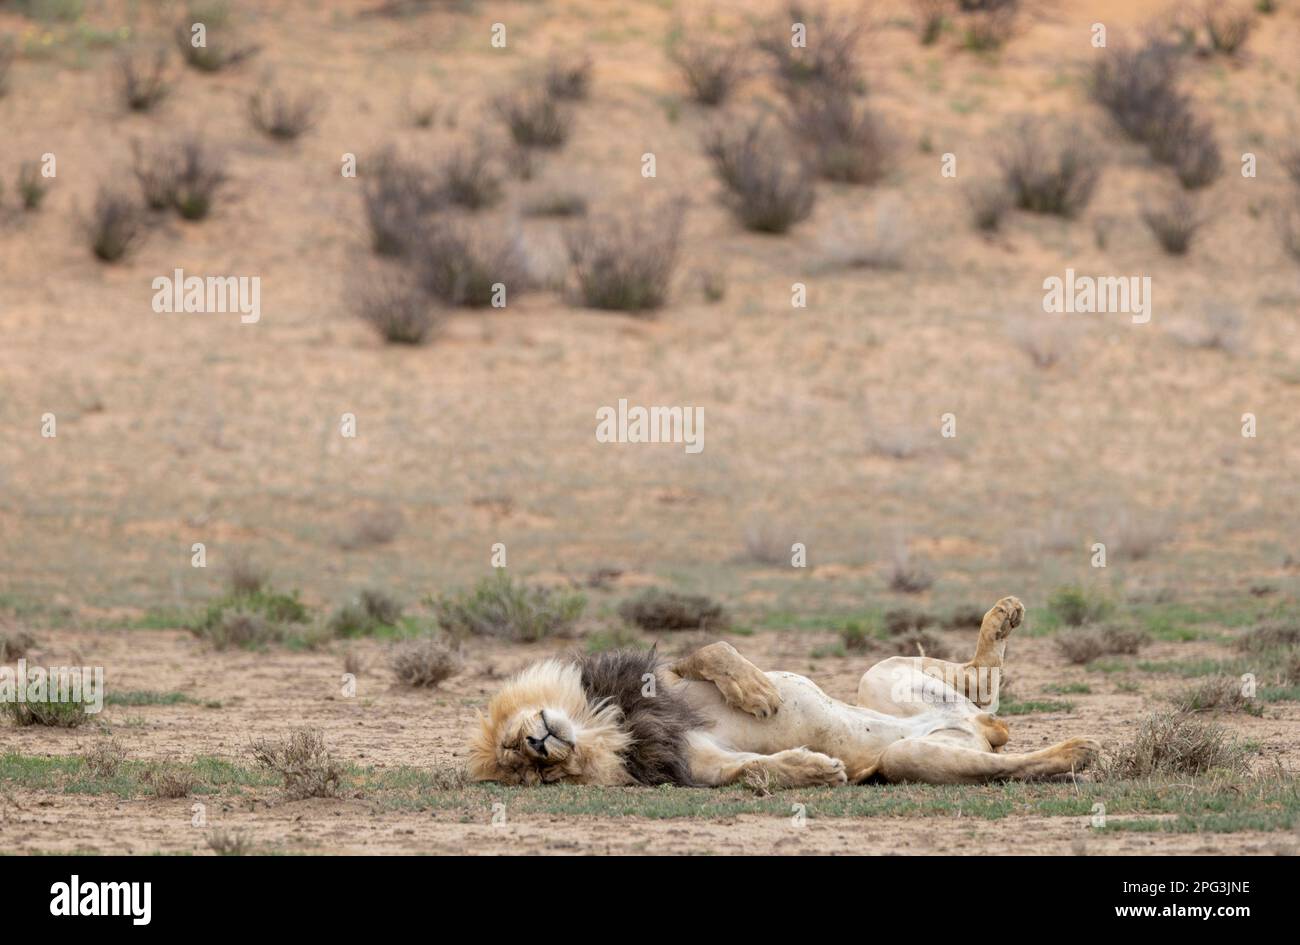 Stock photo of a large male lion sleeping on his back with legs in the air in an open area in the Kgalagadi Stock Photo